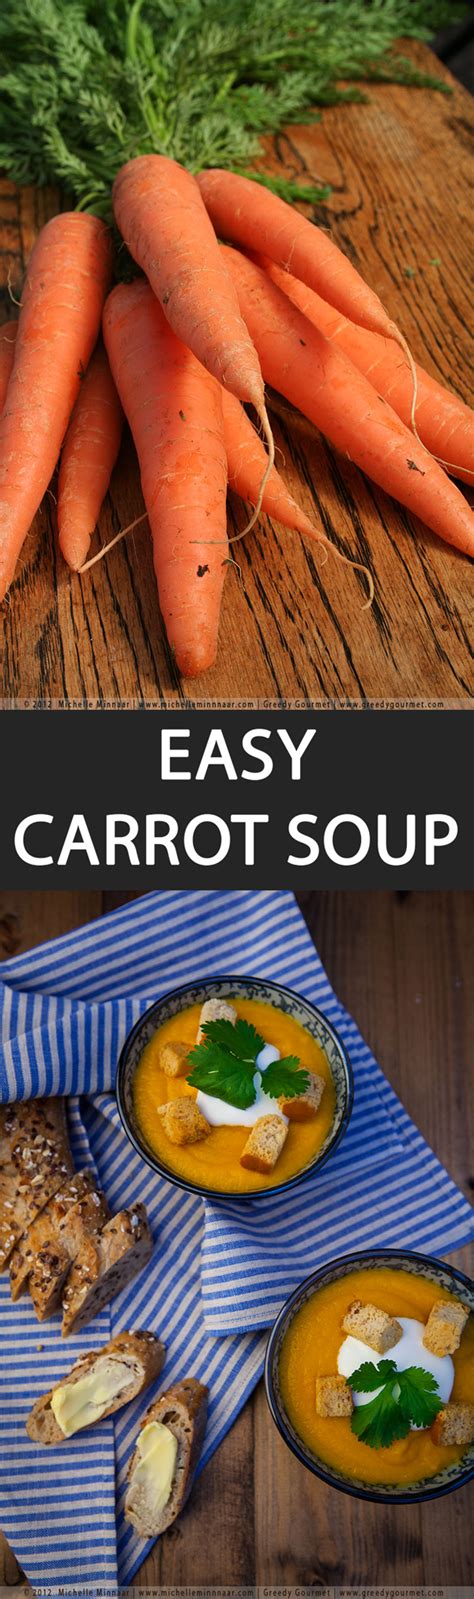 The best recipes with photos to choose an easy carrot and soup recipe. How To Make Carrot Soup - Master This Simple Carrot Soup ...